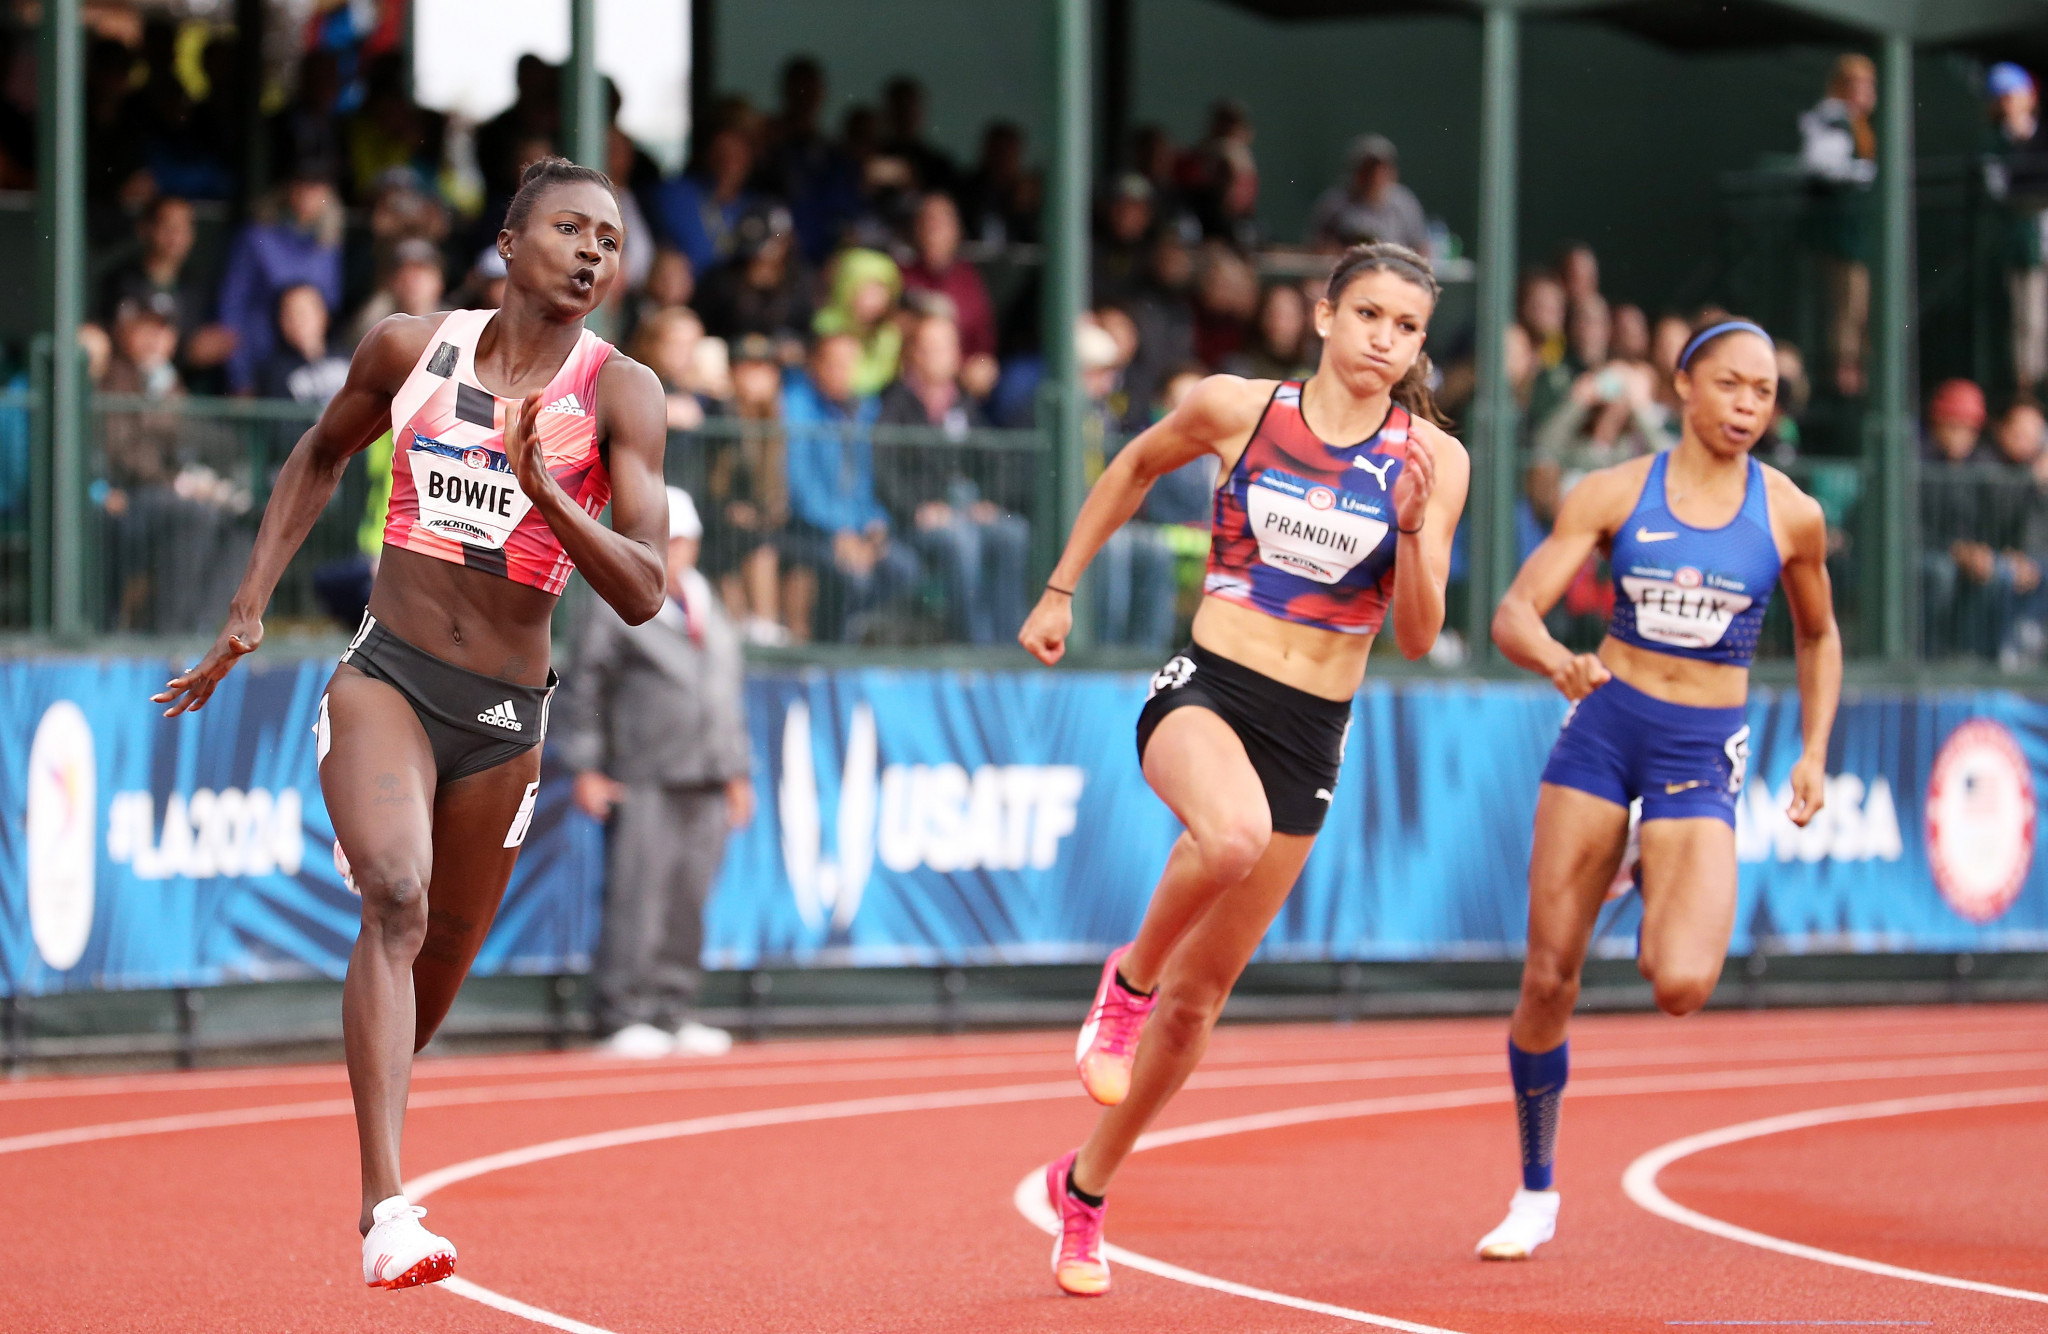 Organisers determining new dates for US Olympic athletics trials after Tokyo 2020 rescheduling